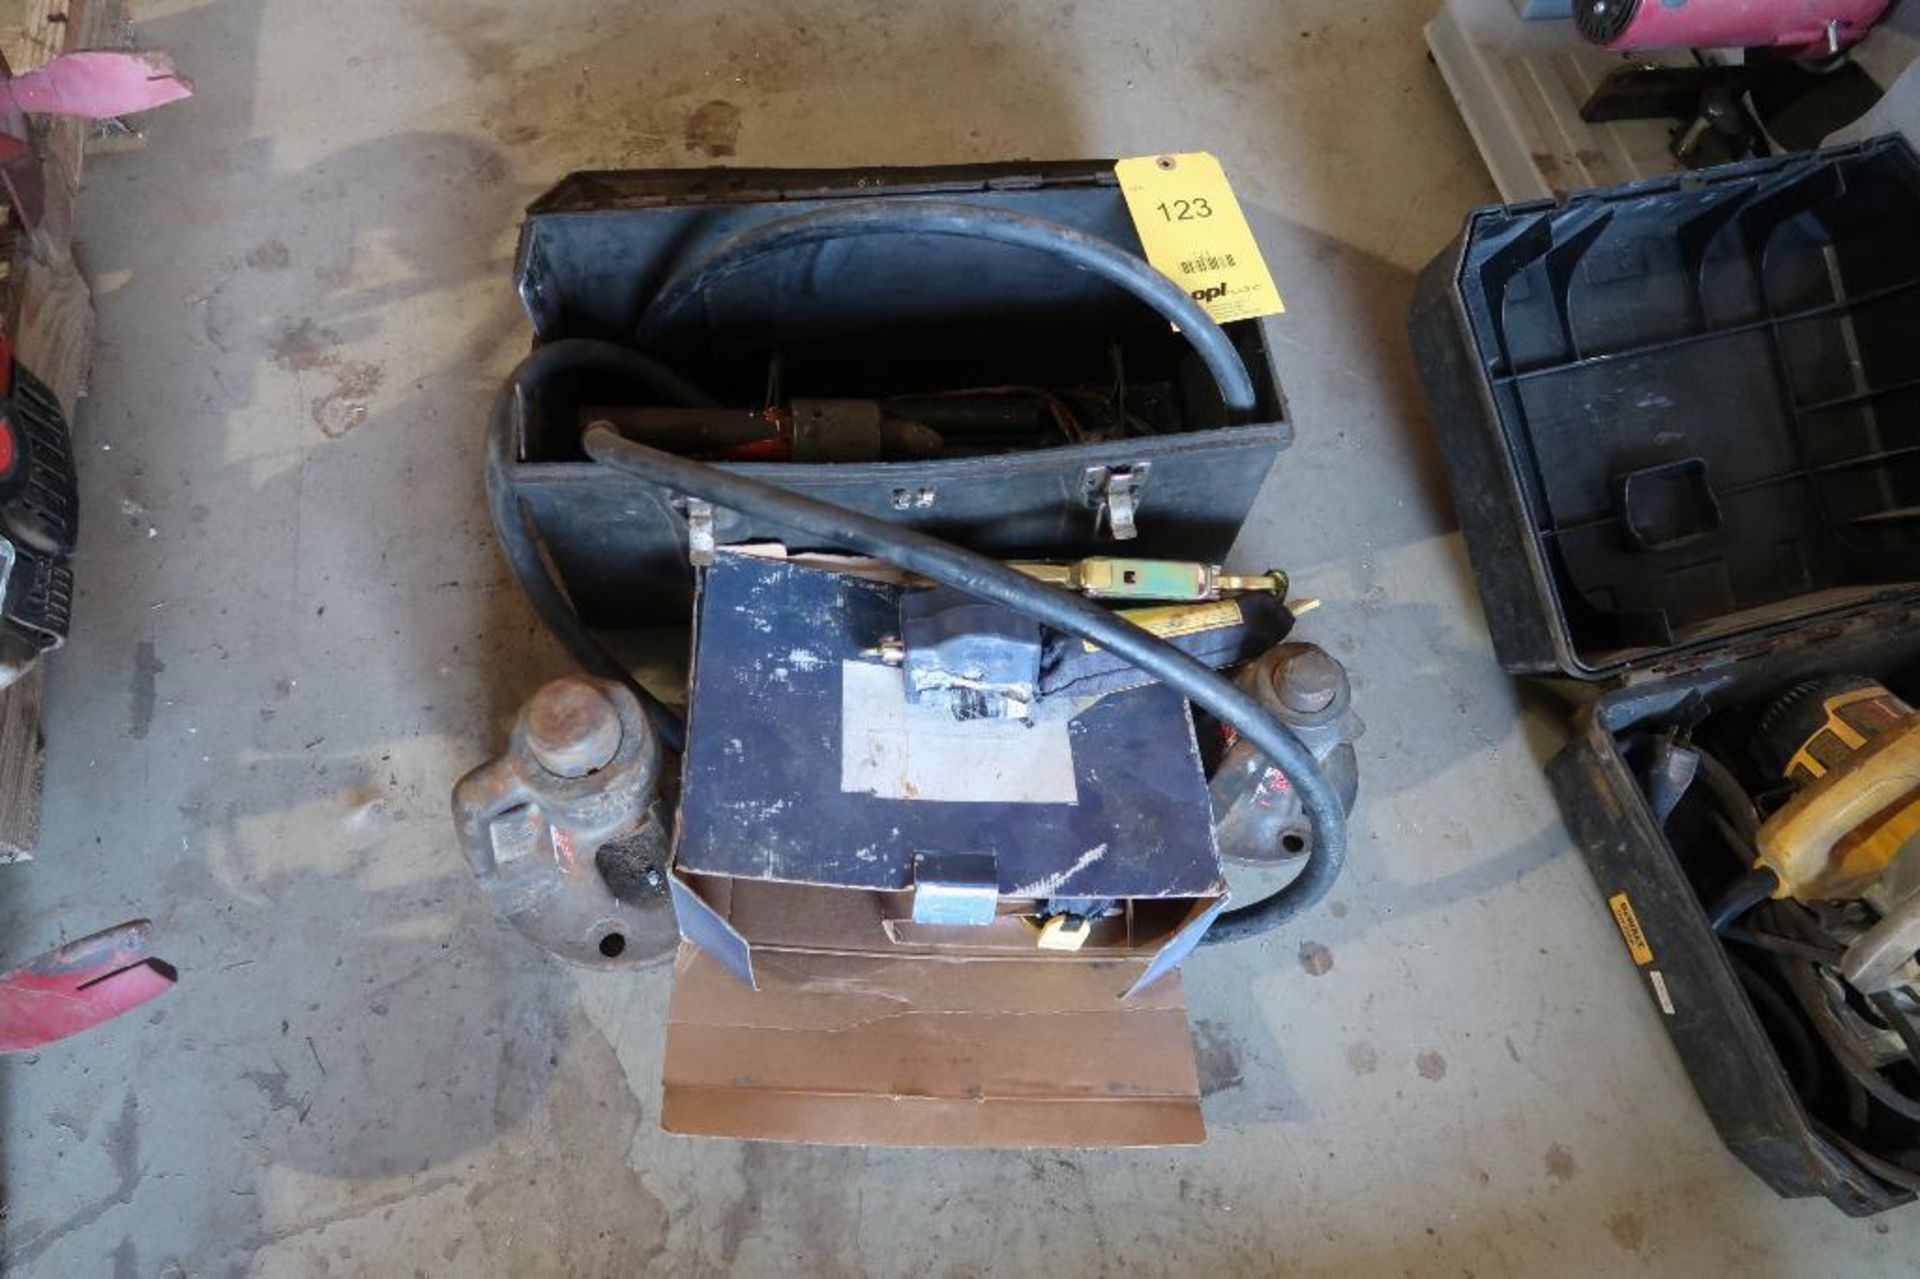 LOT: Cable Cutter, Safety Strap, Hydraulic Tool